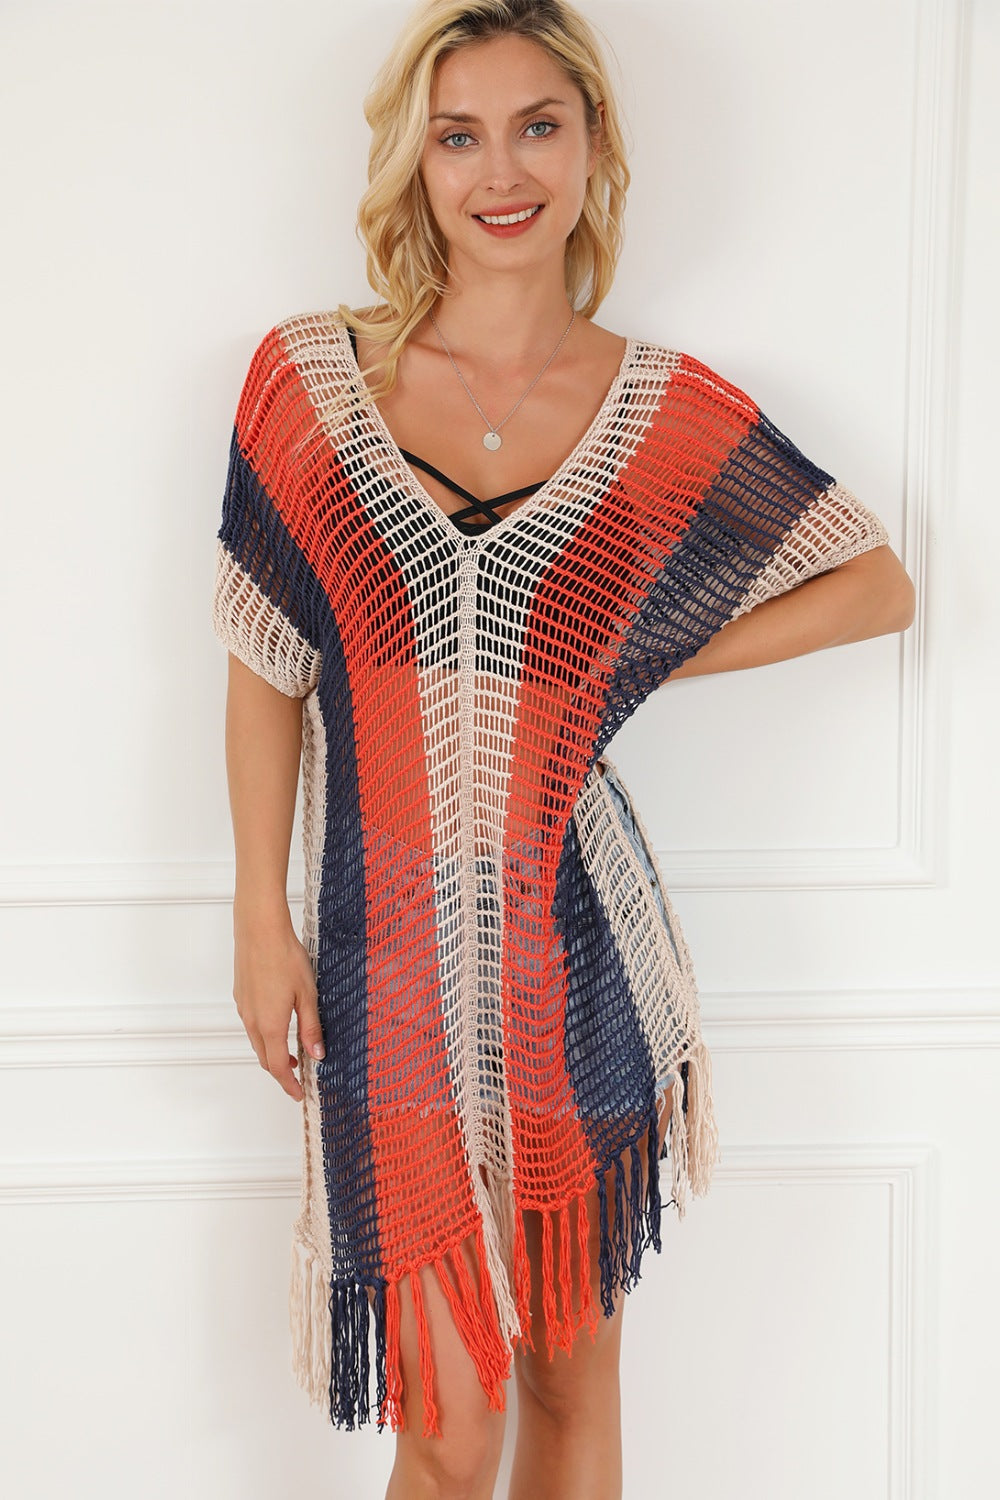 Tassel Color Block Red, White and Blue V-Neck Swim Cover Up Southern Soul Collectives